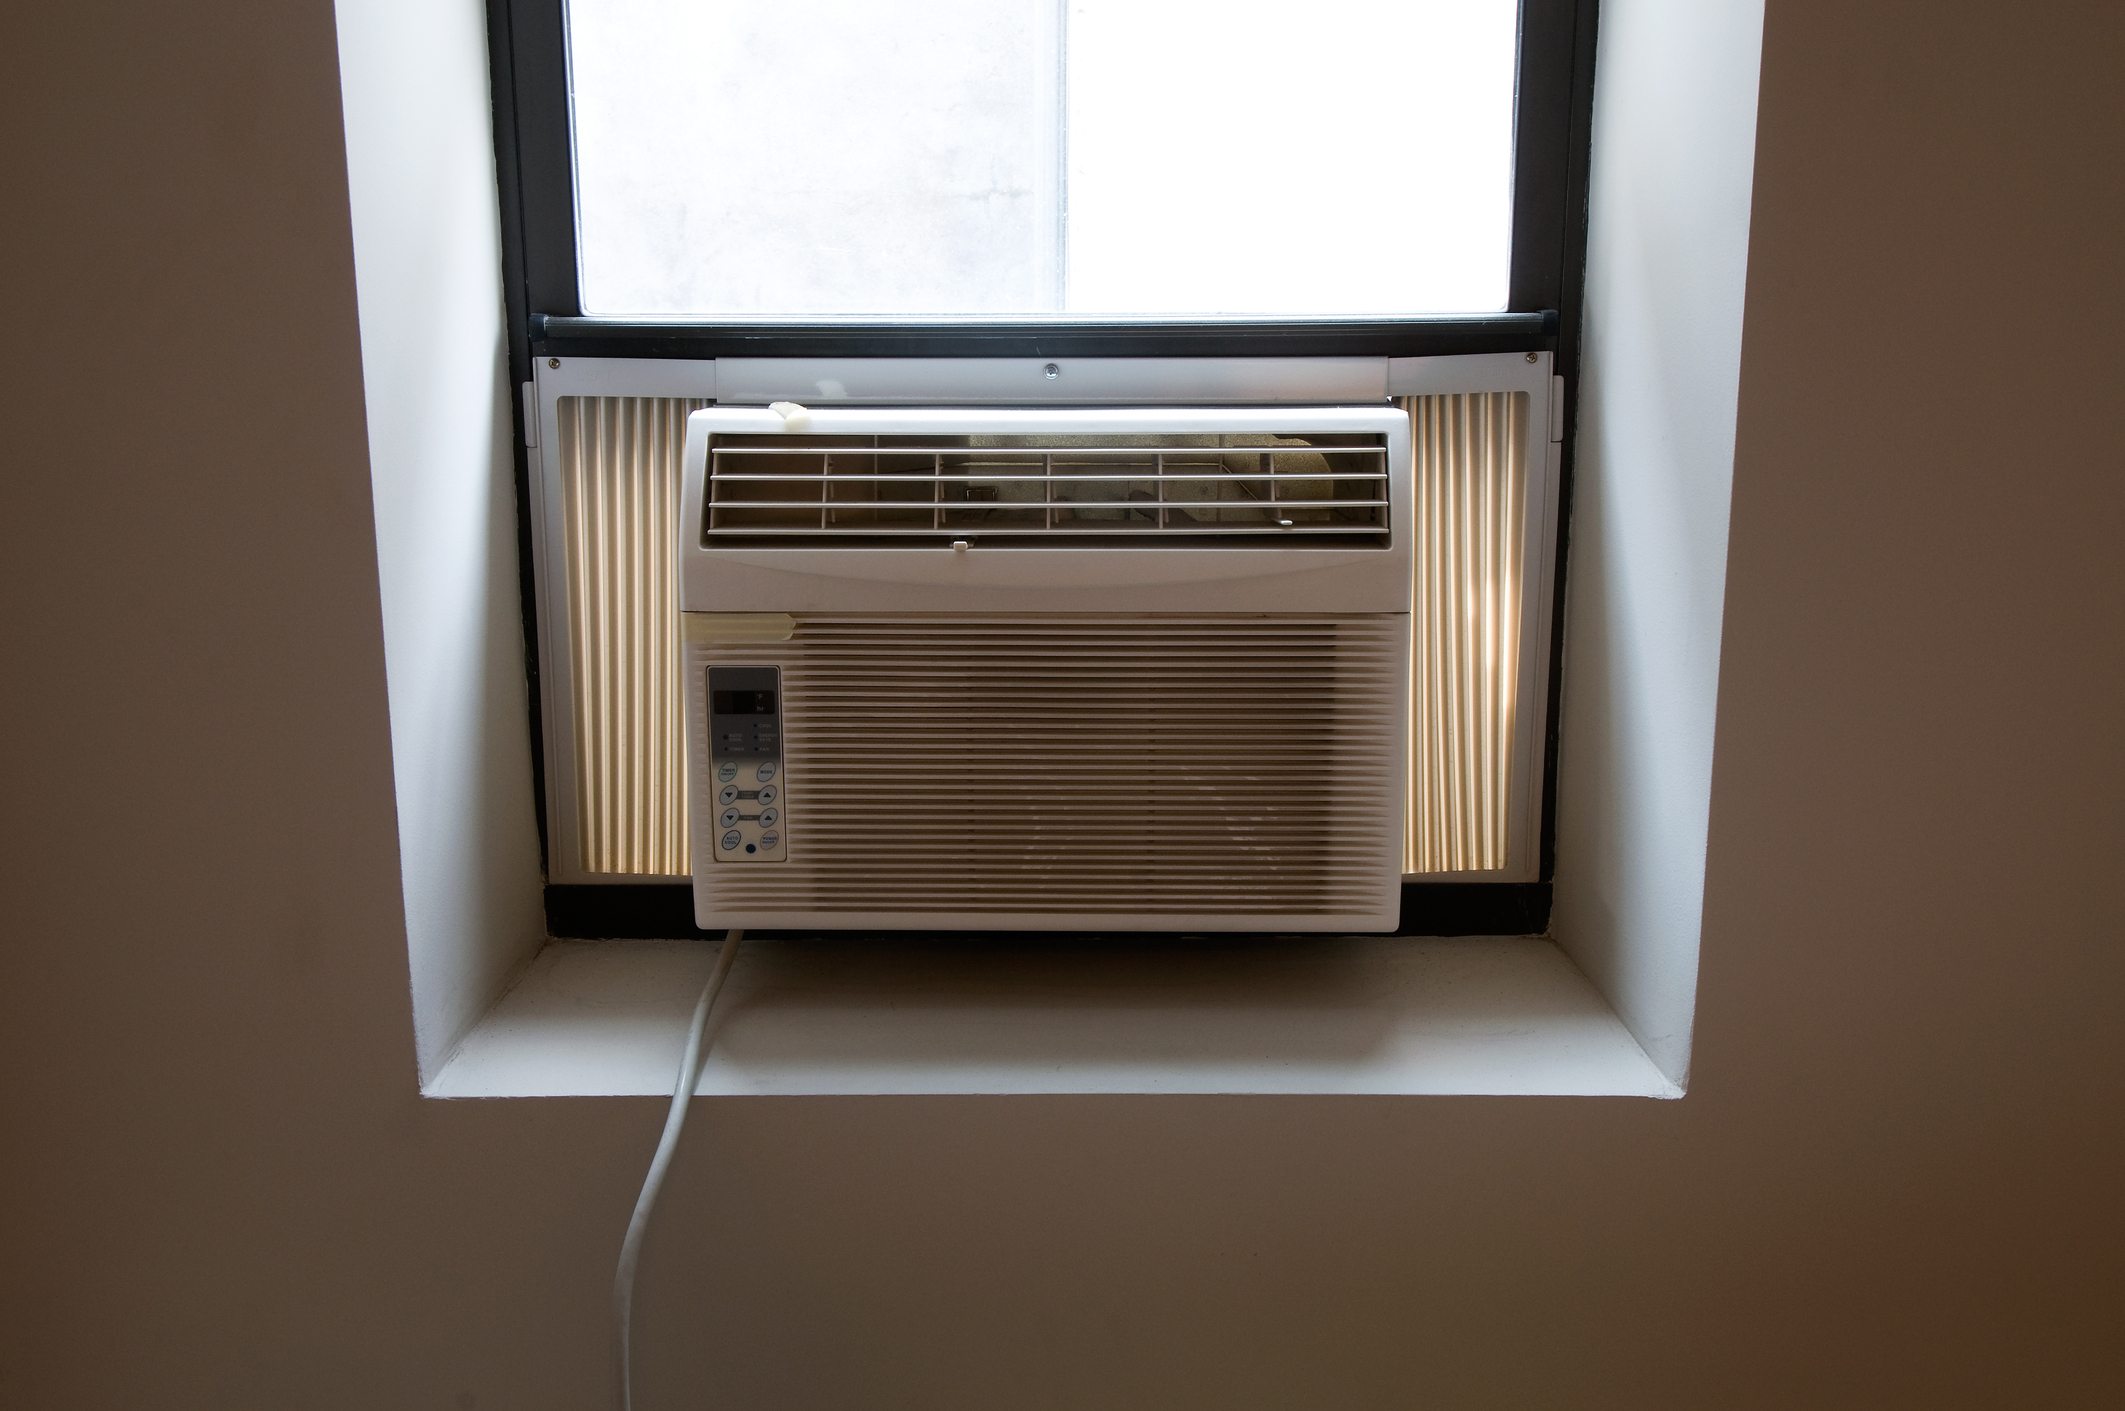 Air conditioning unit in window